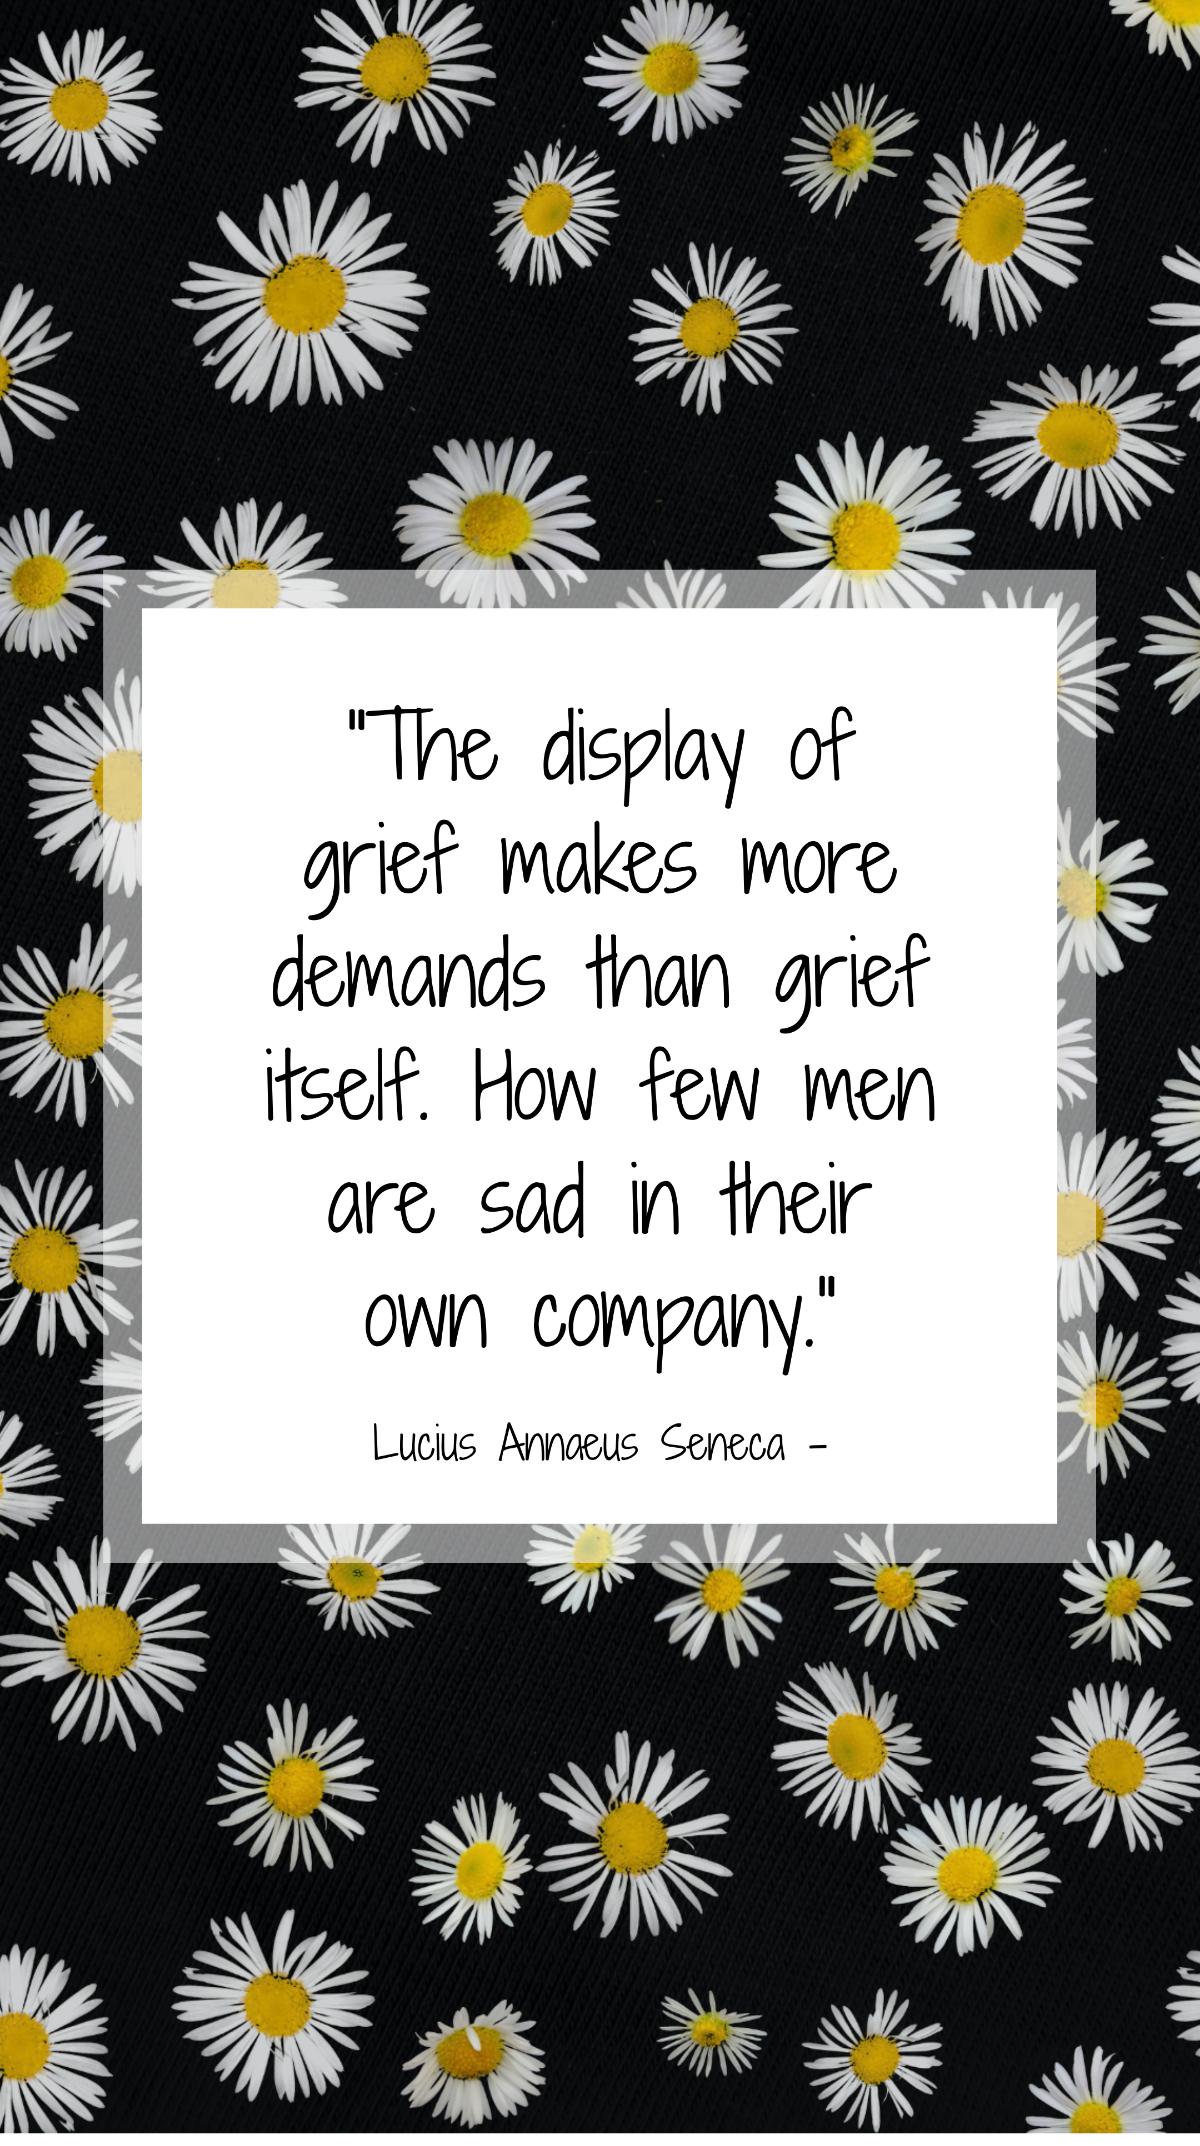 Lucius Annaeus Seneca - The display of grief makes more demands than grief itself. How few men are sad in their own company. Template